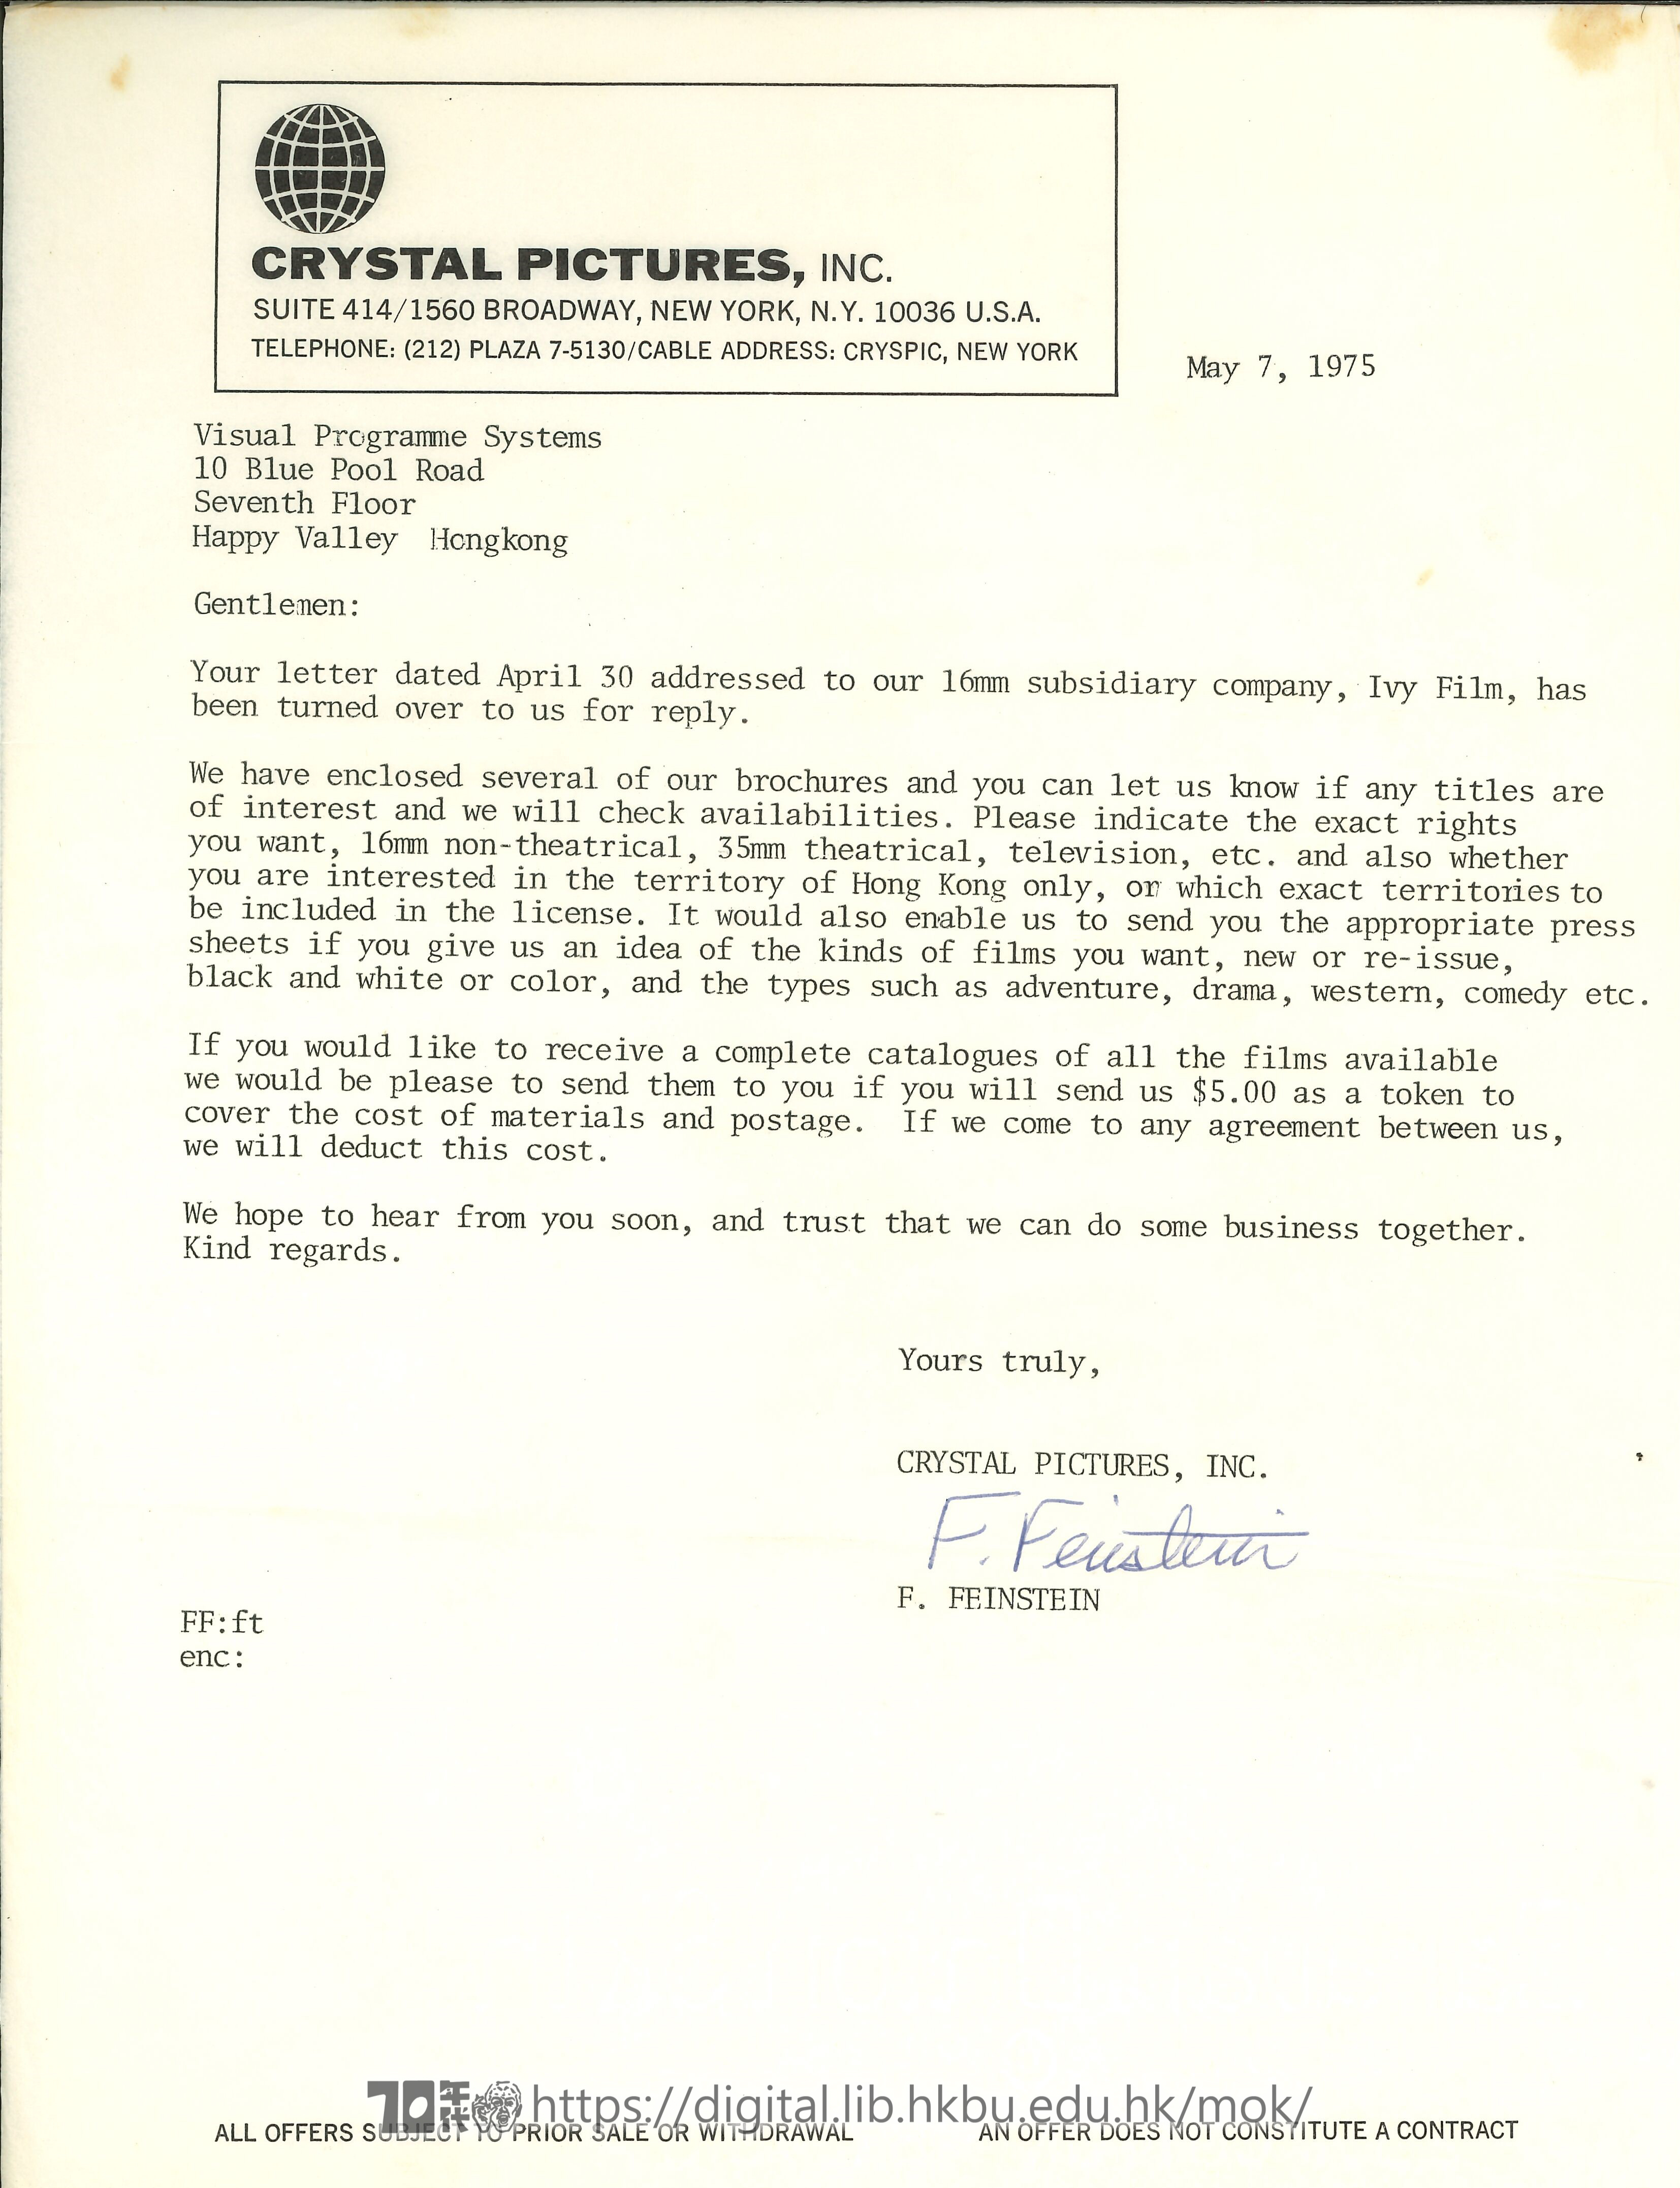   Letter from F. Feinstein, Crystal Pictures FEINSTEIN, F. 